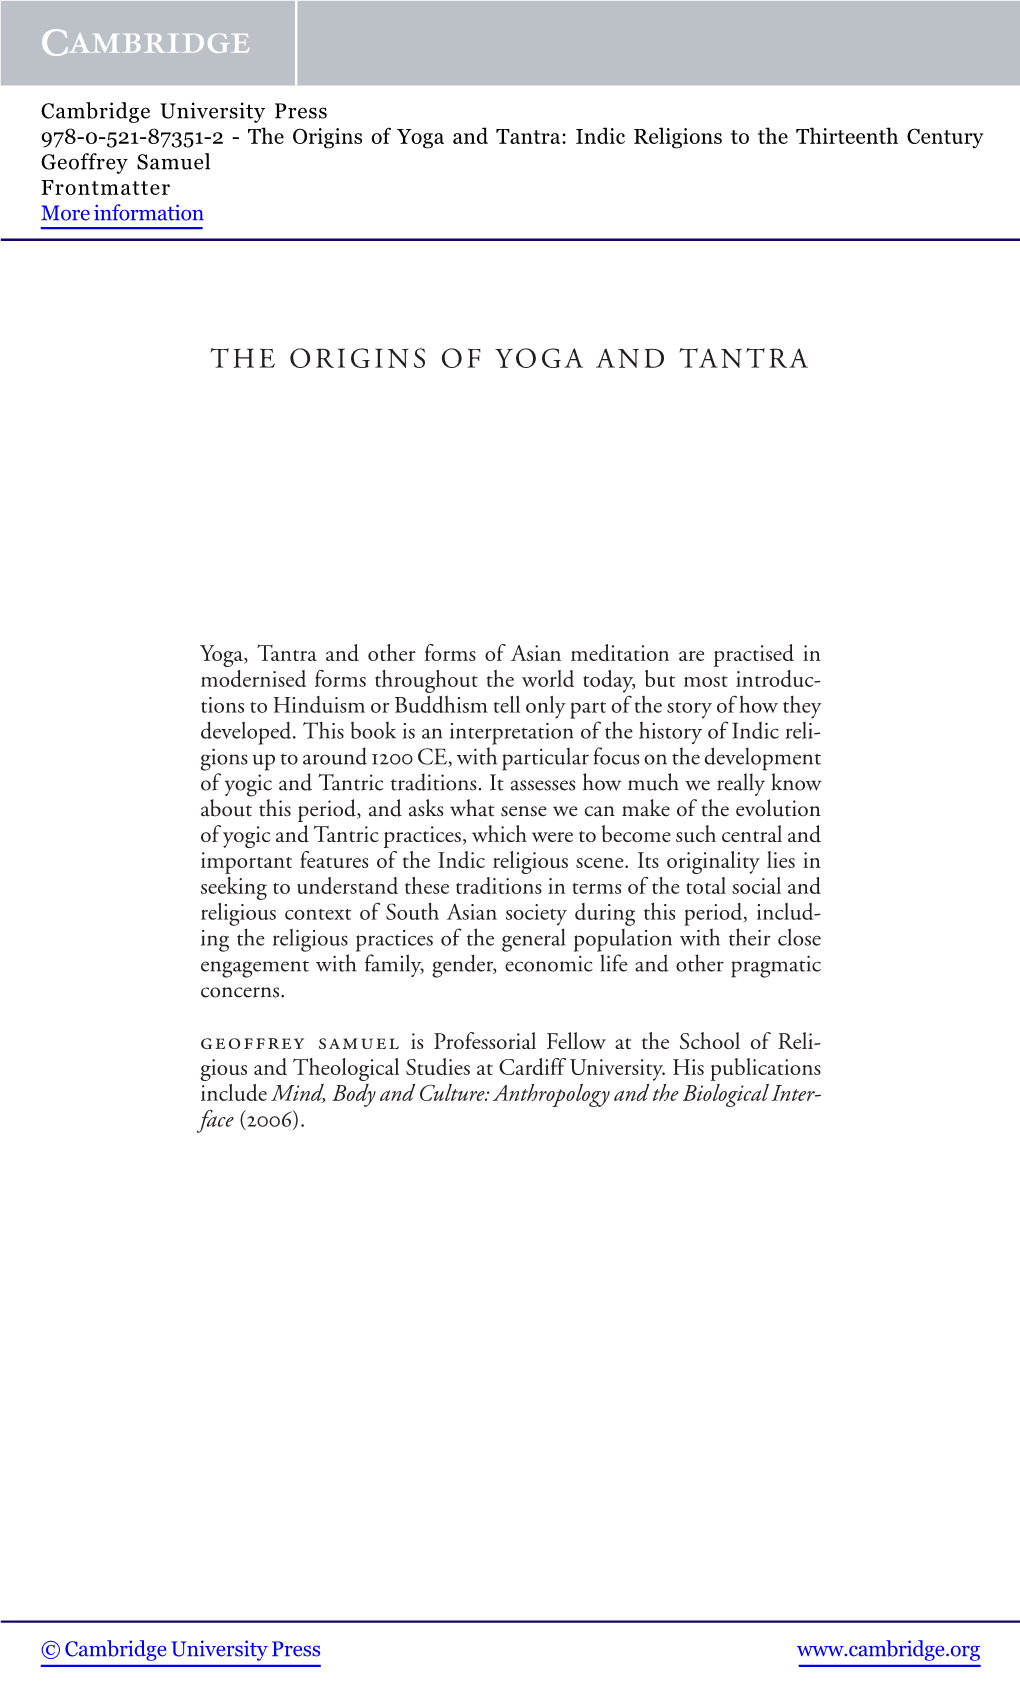 The Origins of Yoga and Tantra: Indic Religions to the Thirteenth Century Geoffrey Samuel Frontmatter More Information